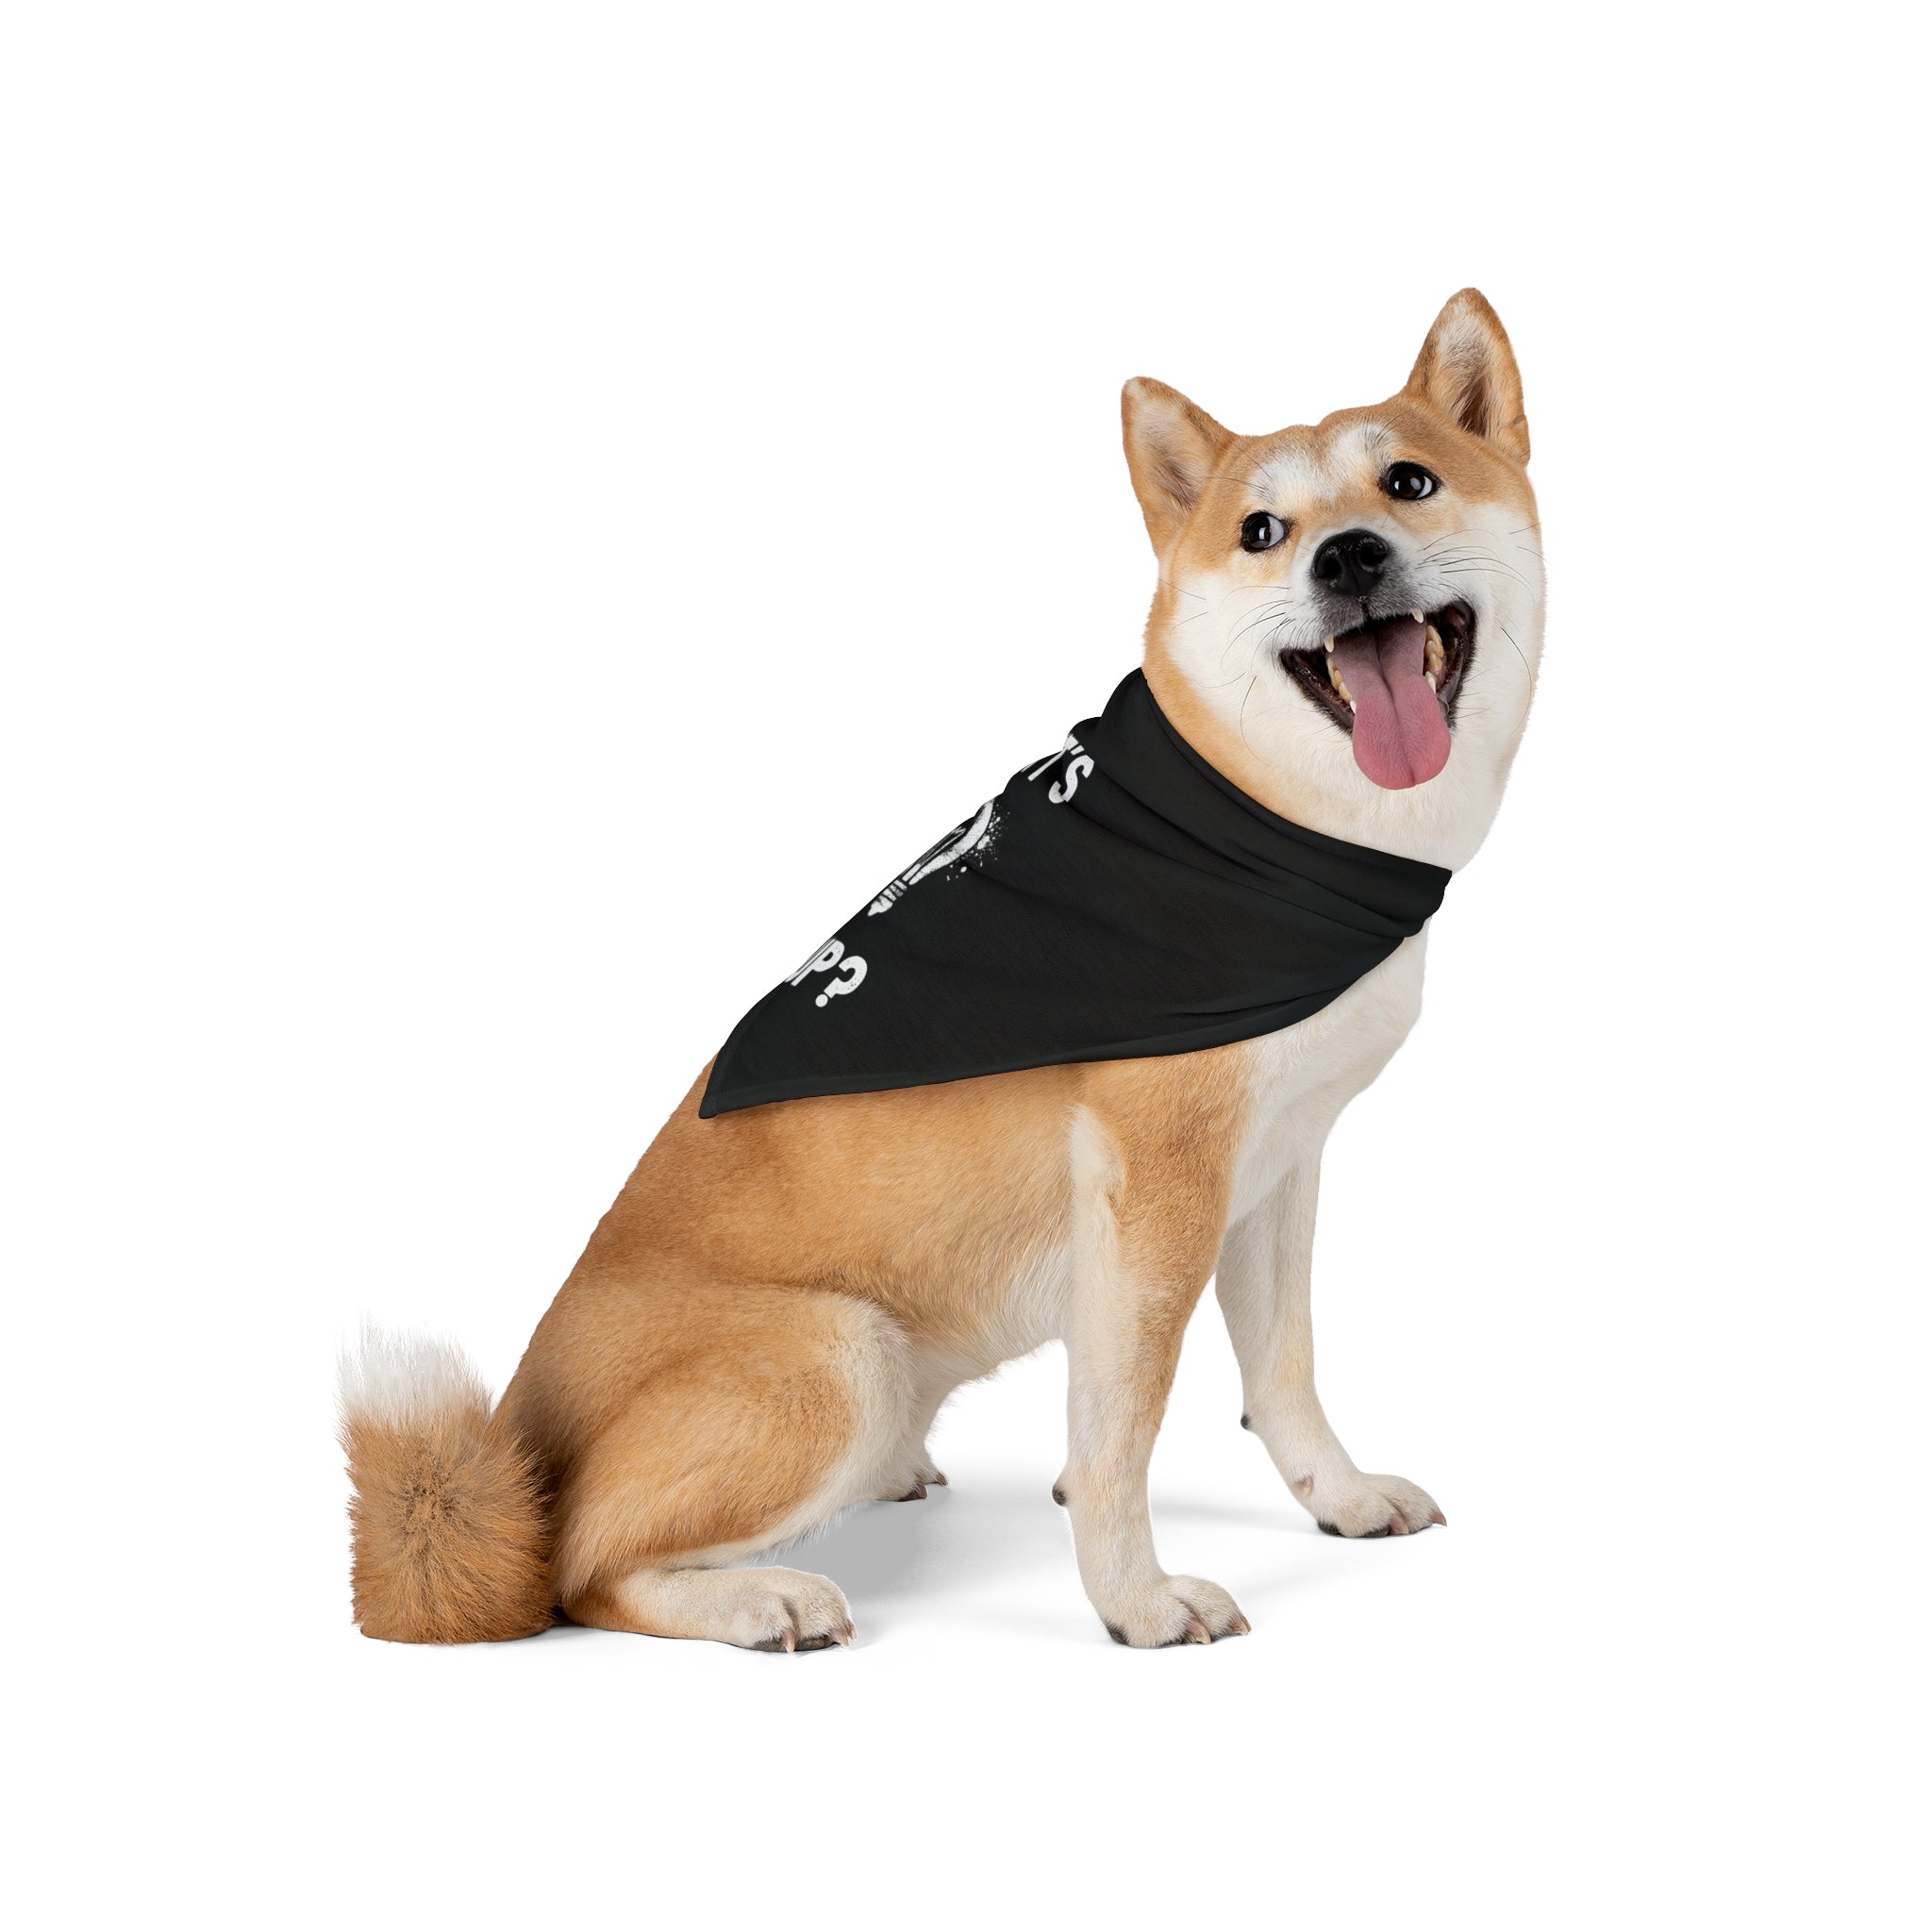 A Shiba Inu dog wearing a black Watts Up - Pet Bandana made from spun polyester sits with its tongue out, against a white background.